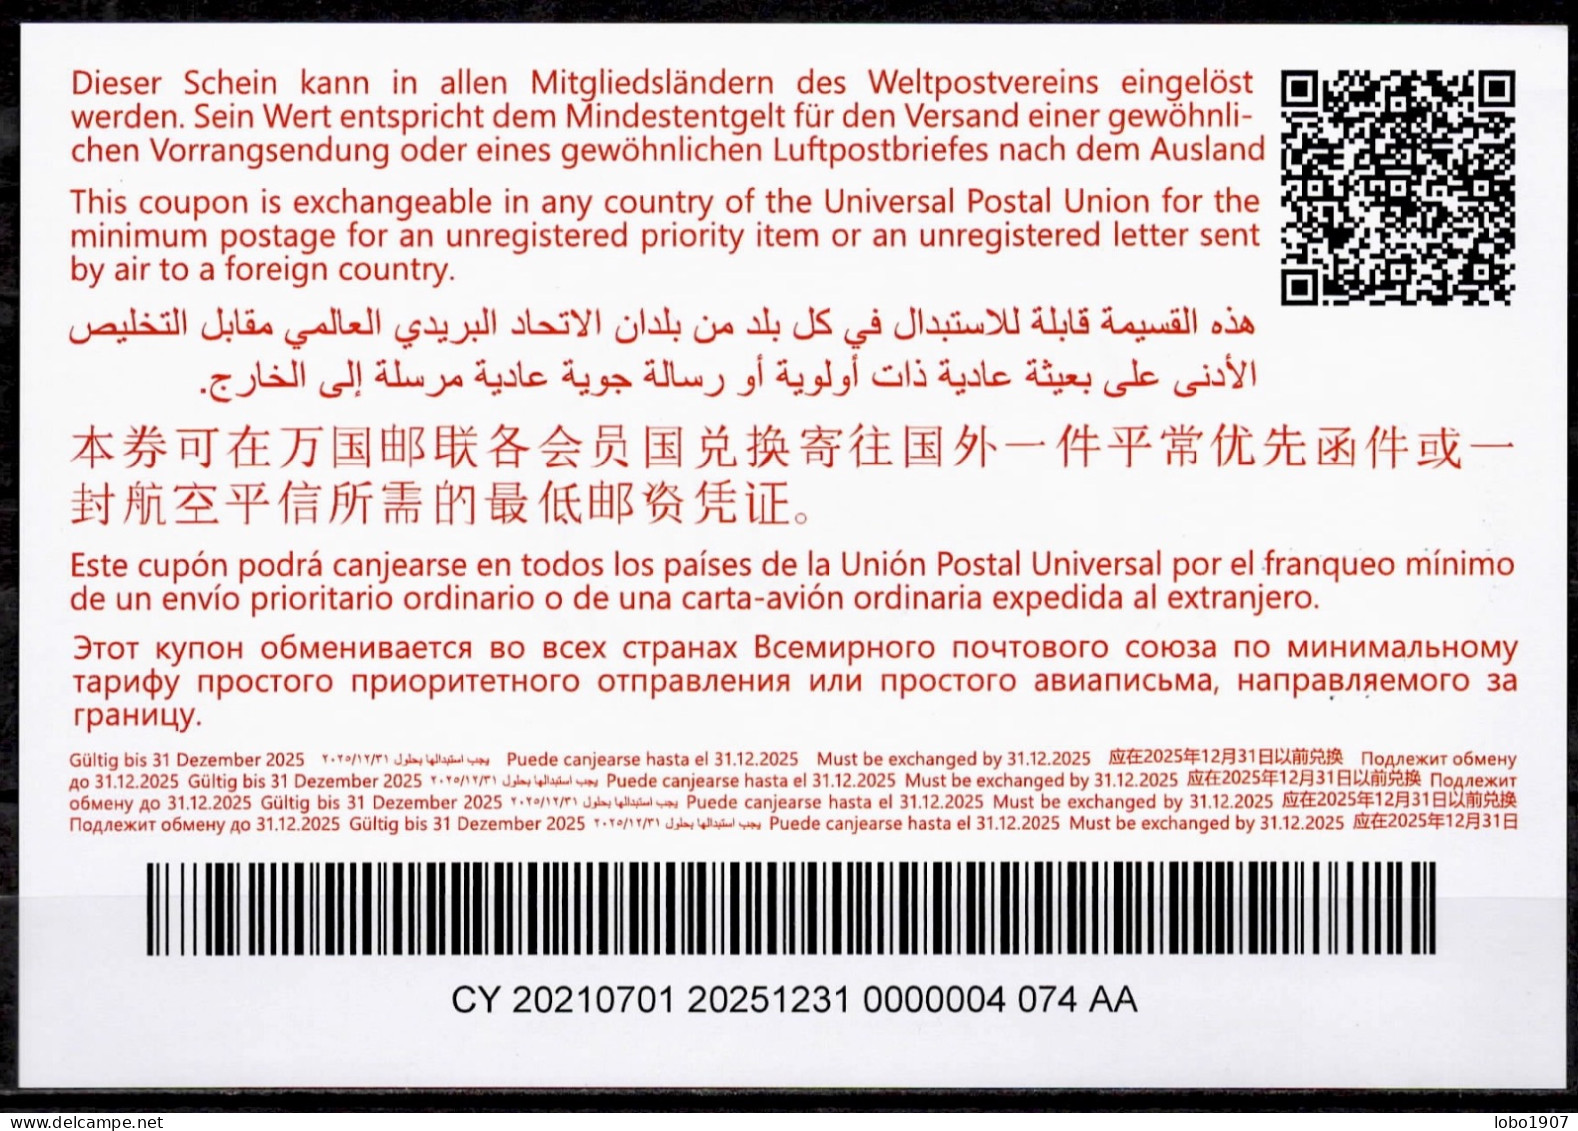 CHYPRE CYPRUS  Abidjan Type Ab47  20210701 AA  Int. Reply Coupon Reponse Antwortschein  IRC IAS  LEFKOSIA 01.09.2021 FD! - Covers & Documents